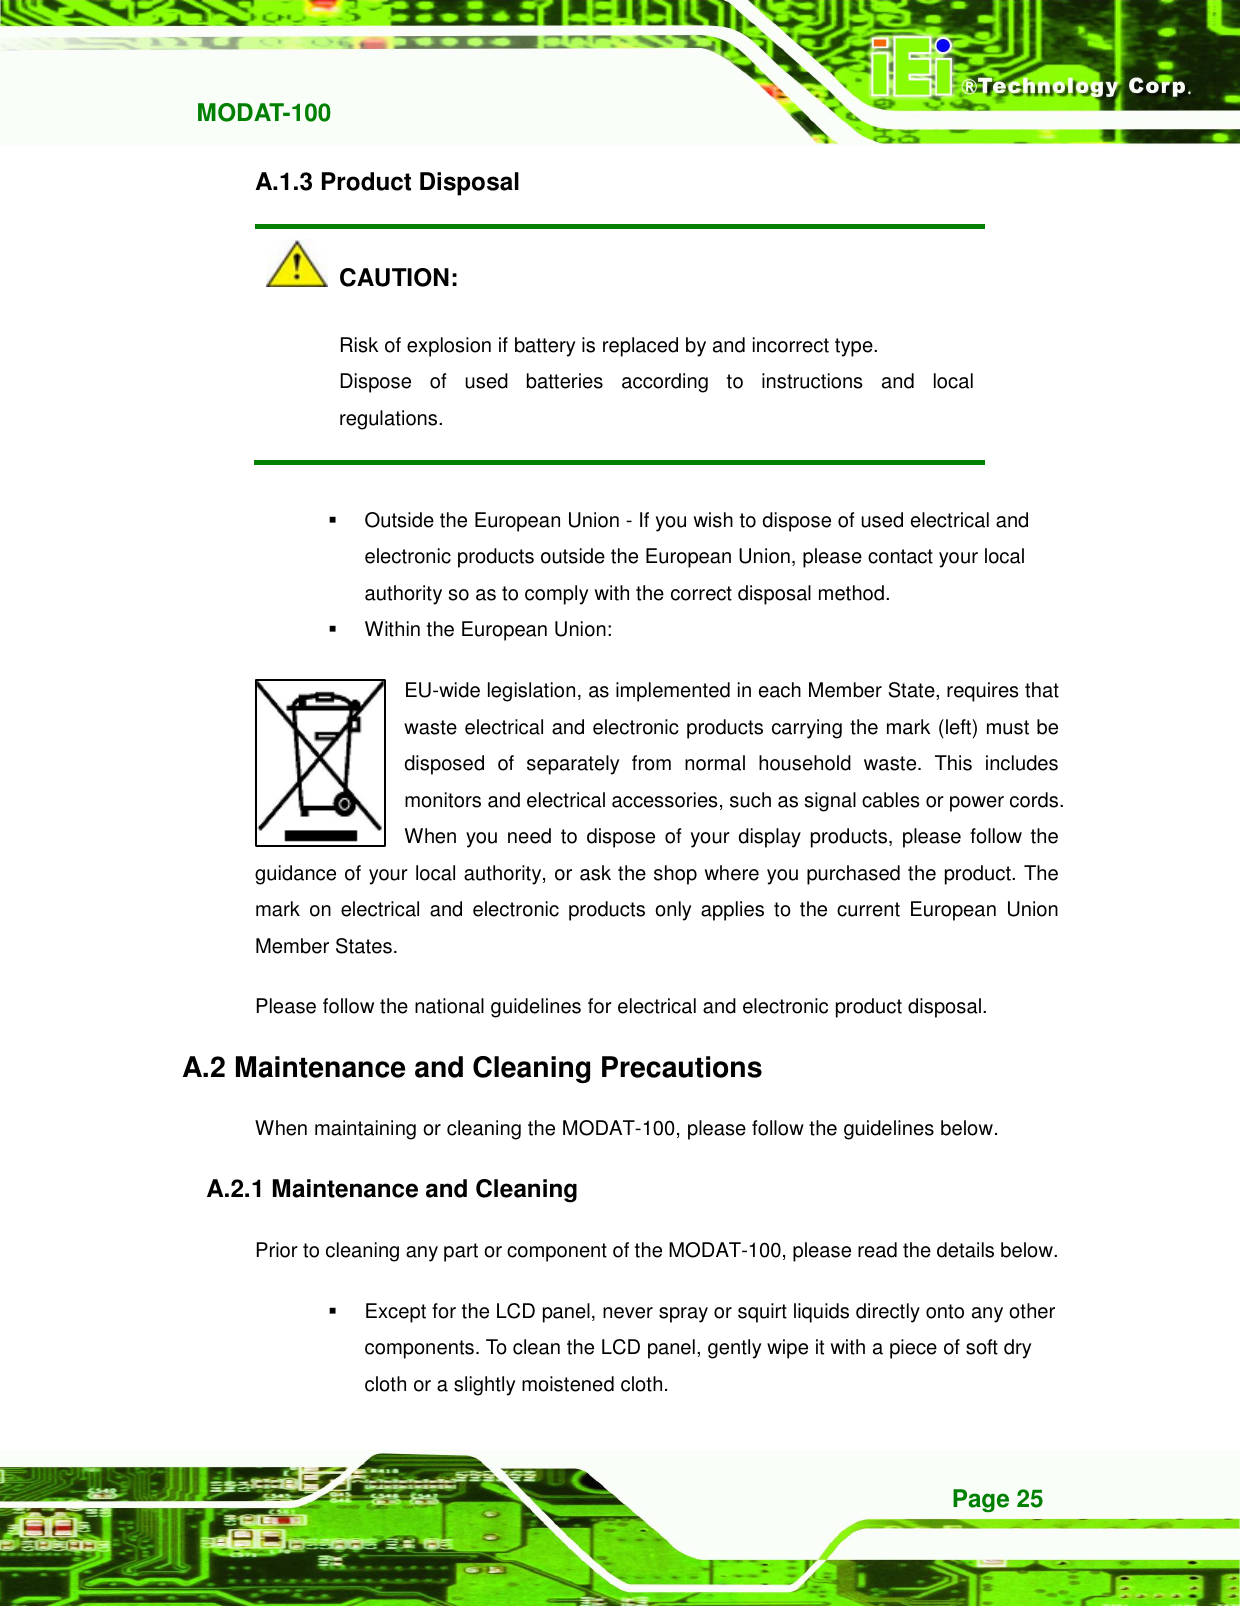   MODAT-100 Page 25 A.1.3 Product Disposal   CAUTION: Risk of explosion if battery is replaced by and incorrect type. Dispose  of  used  batteries  according  to  instructions  and  local regulations.    Outside the European Union - If you wish to dispose of used electrical and electronic products outside the European Union, please contact your local authority so as to comply with the correct disposal method.   Within the European Union: EU-wide legislation, as implemented in each Member State, requires that waste electrical and electronic products carrying the mark (left) must be disposed  of  separately  from  normal  household  waste.  This  includes monitors and electrical accessories, such as signal cables or power cords. When you need  to  dispose  of  your  display  products, please  follow the guidance of your local authority, or ask the shop where you purchased the product. The mark  on  electrical  and  electronic  products  only  applies  to the  current  European  Union Member States. Please follow the national guidelines for electrical and electronic product disposal. A.2 Maintenance and Cleaning Precautions When maintaining or cleaning the MODAT-100, please follow the guidelines below. A.2.1 Maintenance and Cleaning Prior to cleaning any part or component of the MODAT-100, please read the details below.   Except for the LCD panel, never spray or squirt liquids directly onto any other components. To clean the LCD panel, gently wipe it with a piece of soft dry cloth or a slightly moistened cloth. 